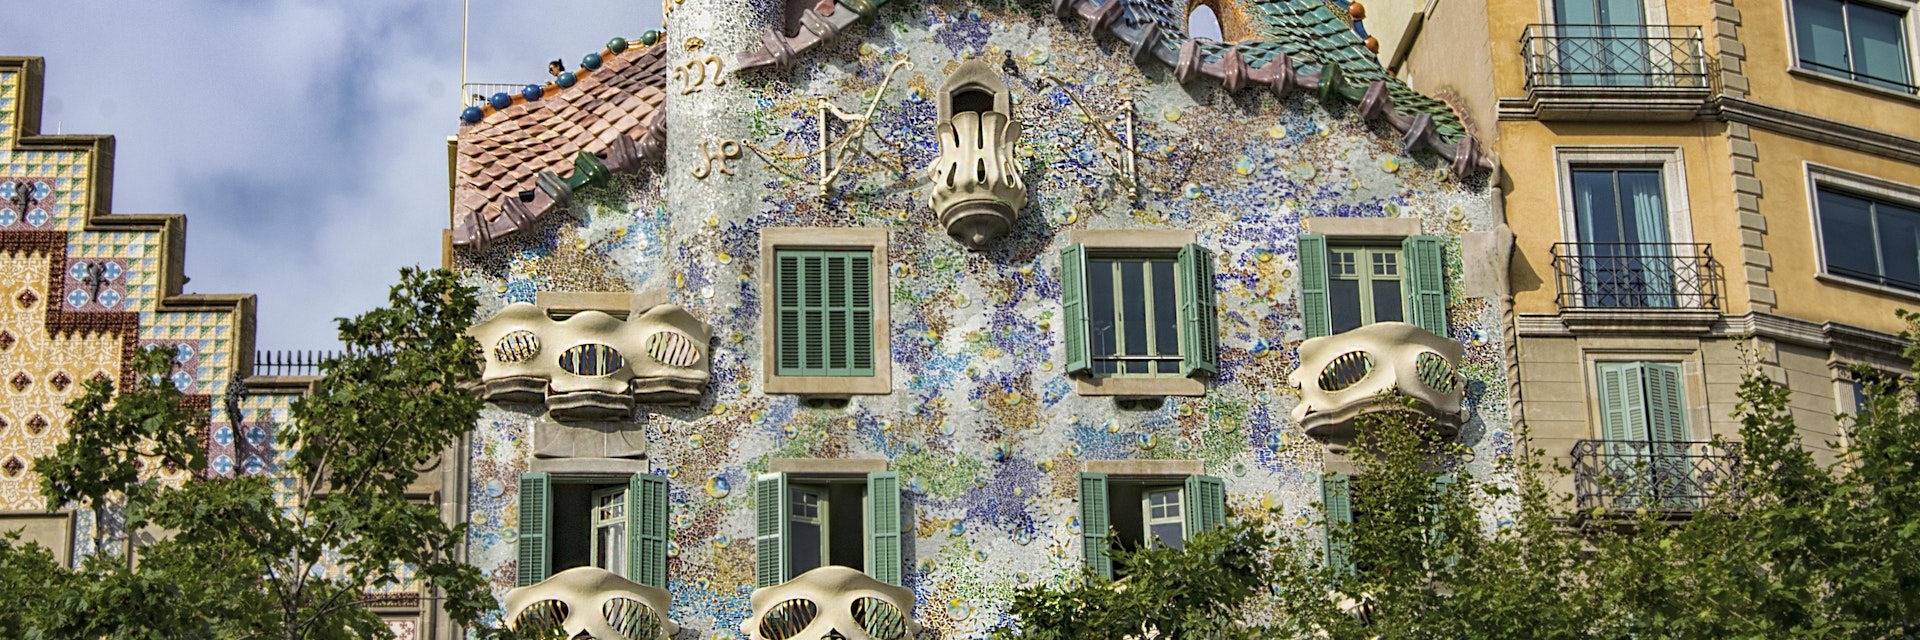 Barcelona, Casa Batlló is one of the two great buildings designed by Antoni Gaudí on Passeig de Gràcia From the outside the façade of Casa Batlló looks like it has been made from skulls and bones.